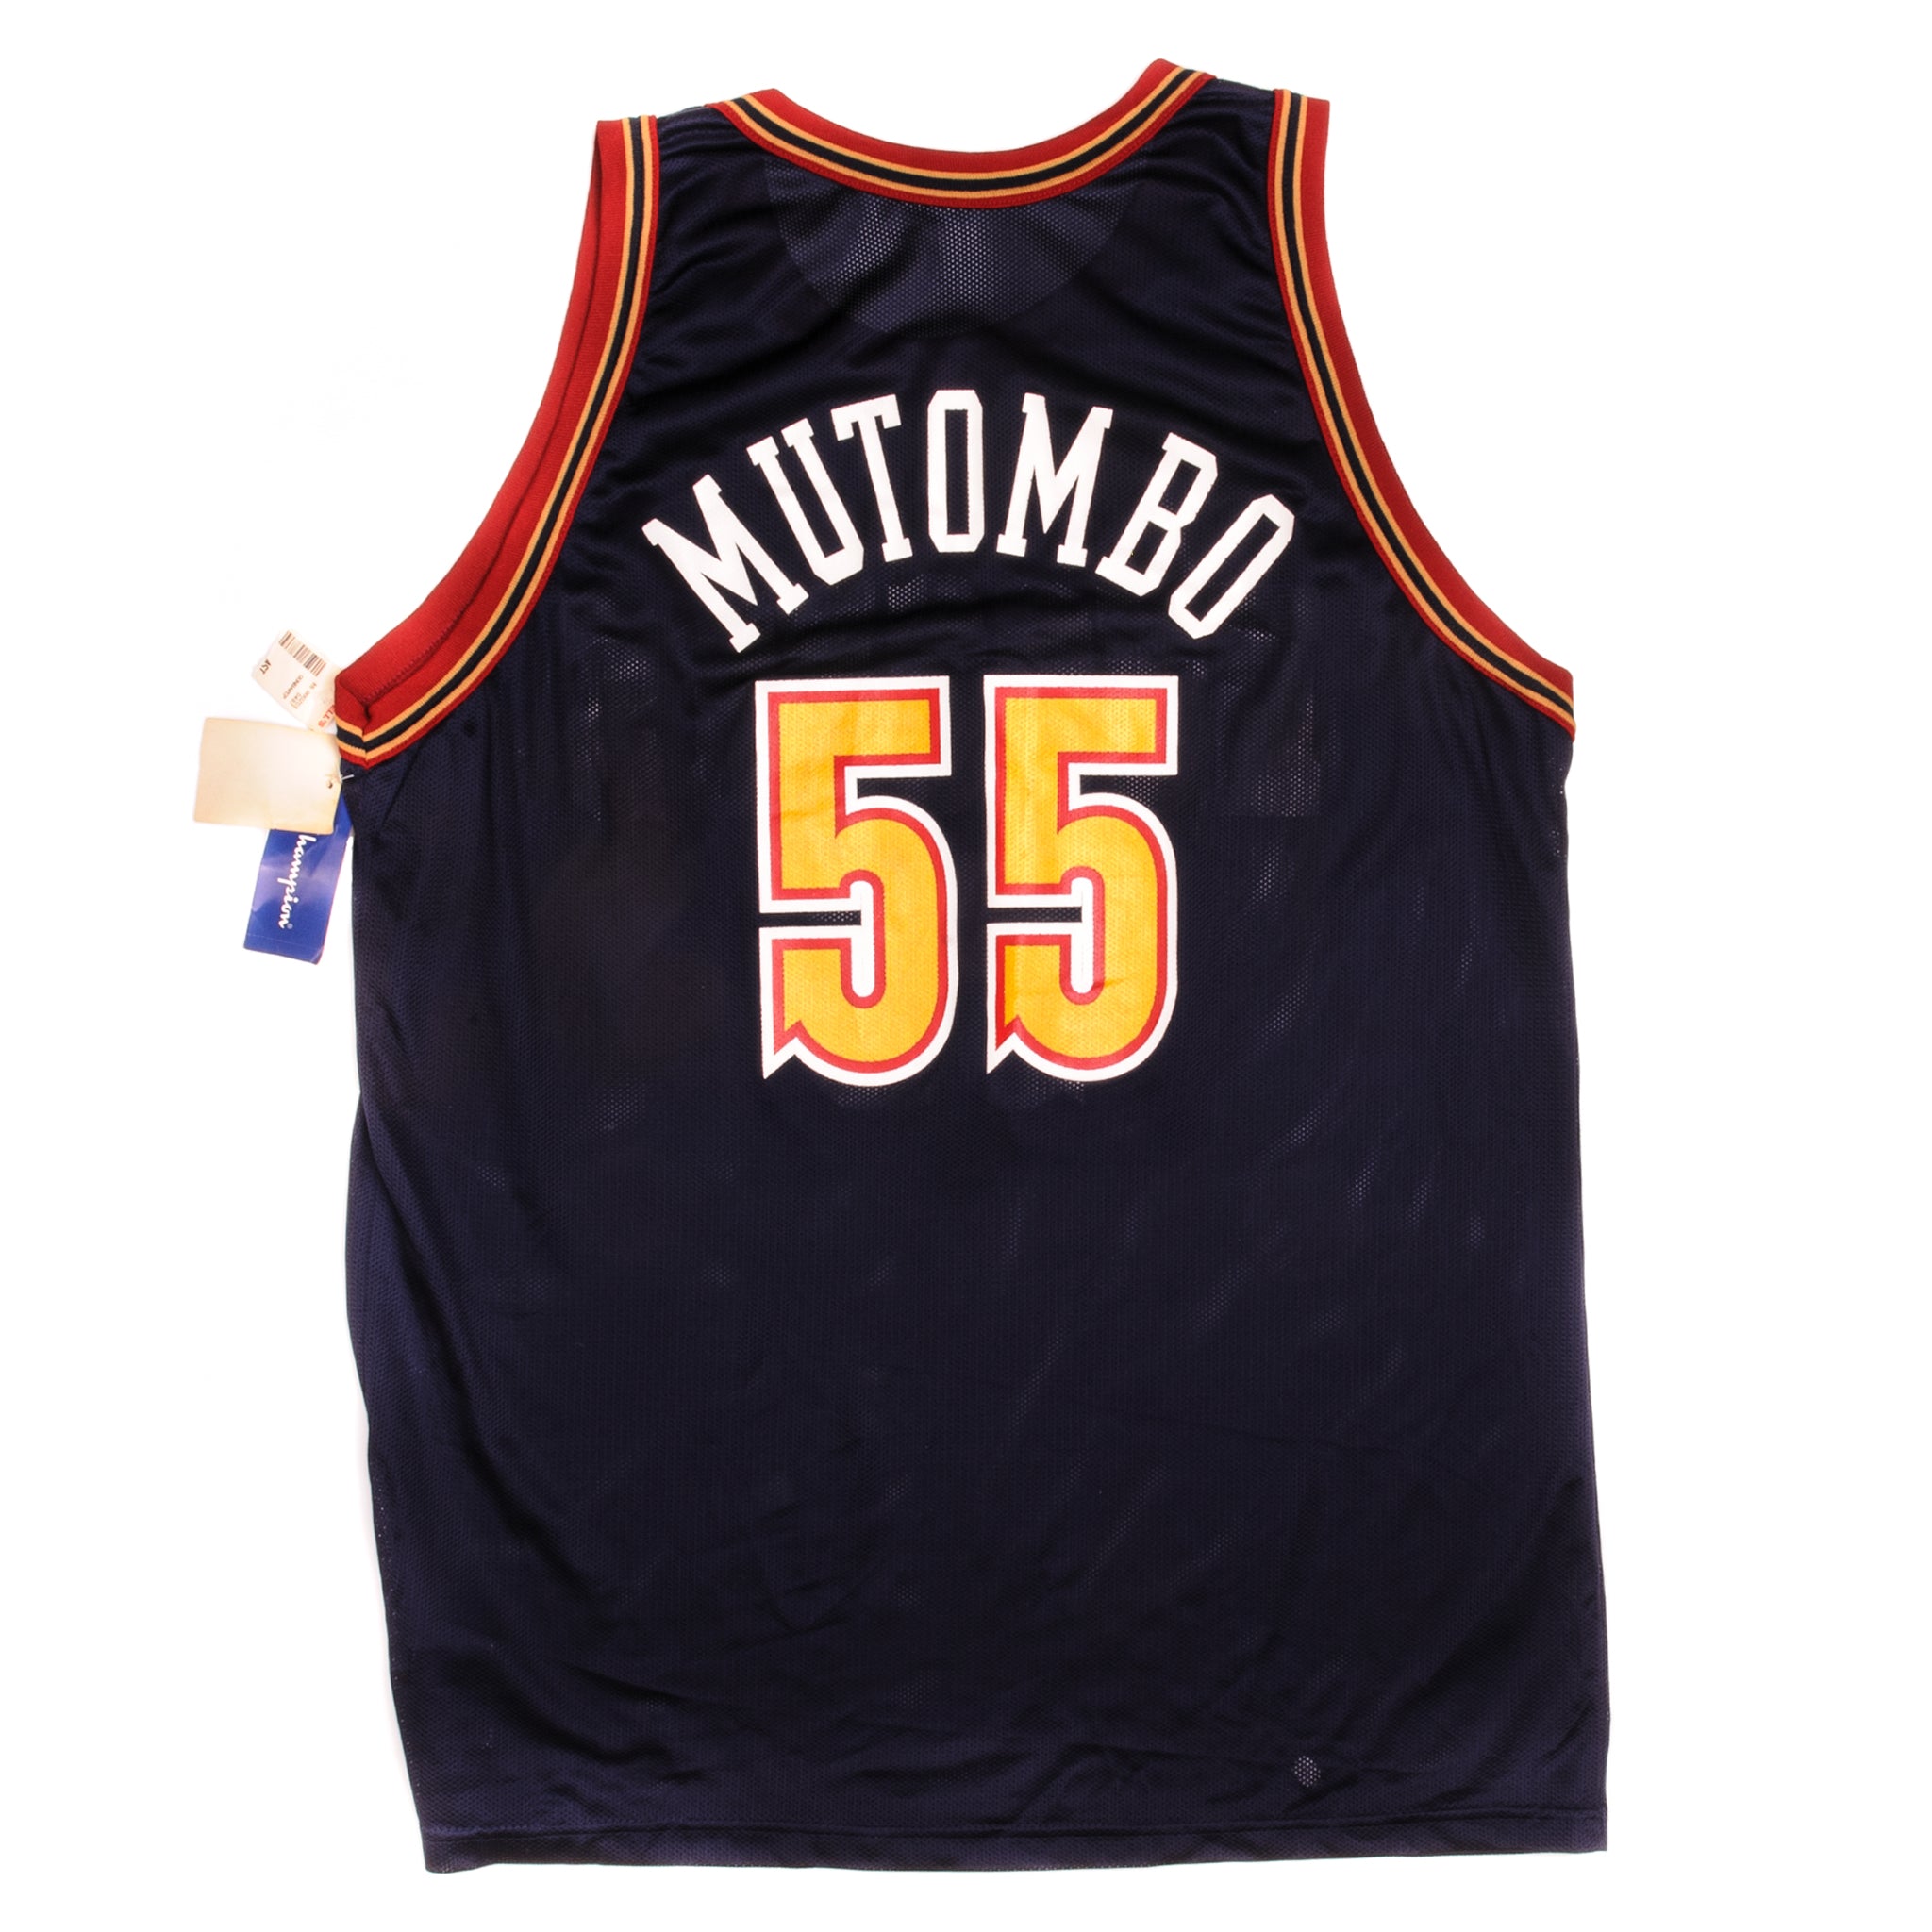 Sports / College Deadstock Vintage Champion NBA Nuggets 55 Mutombo 90s Size XX-Large Made in USA